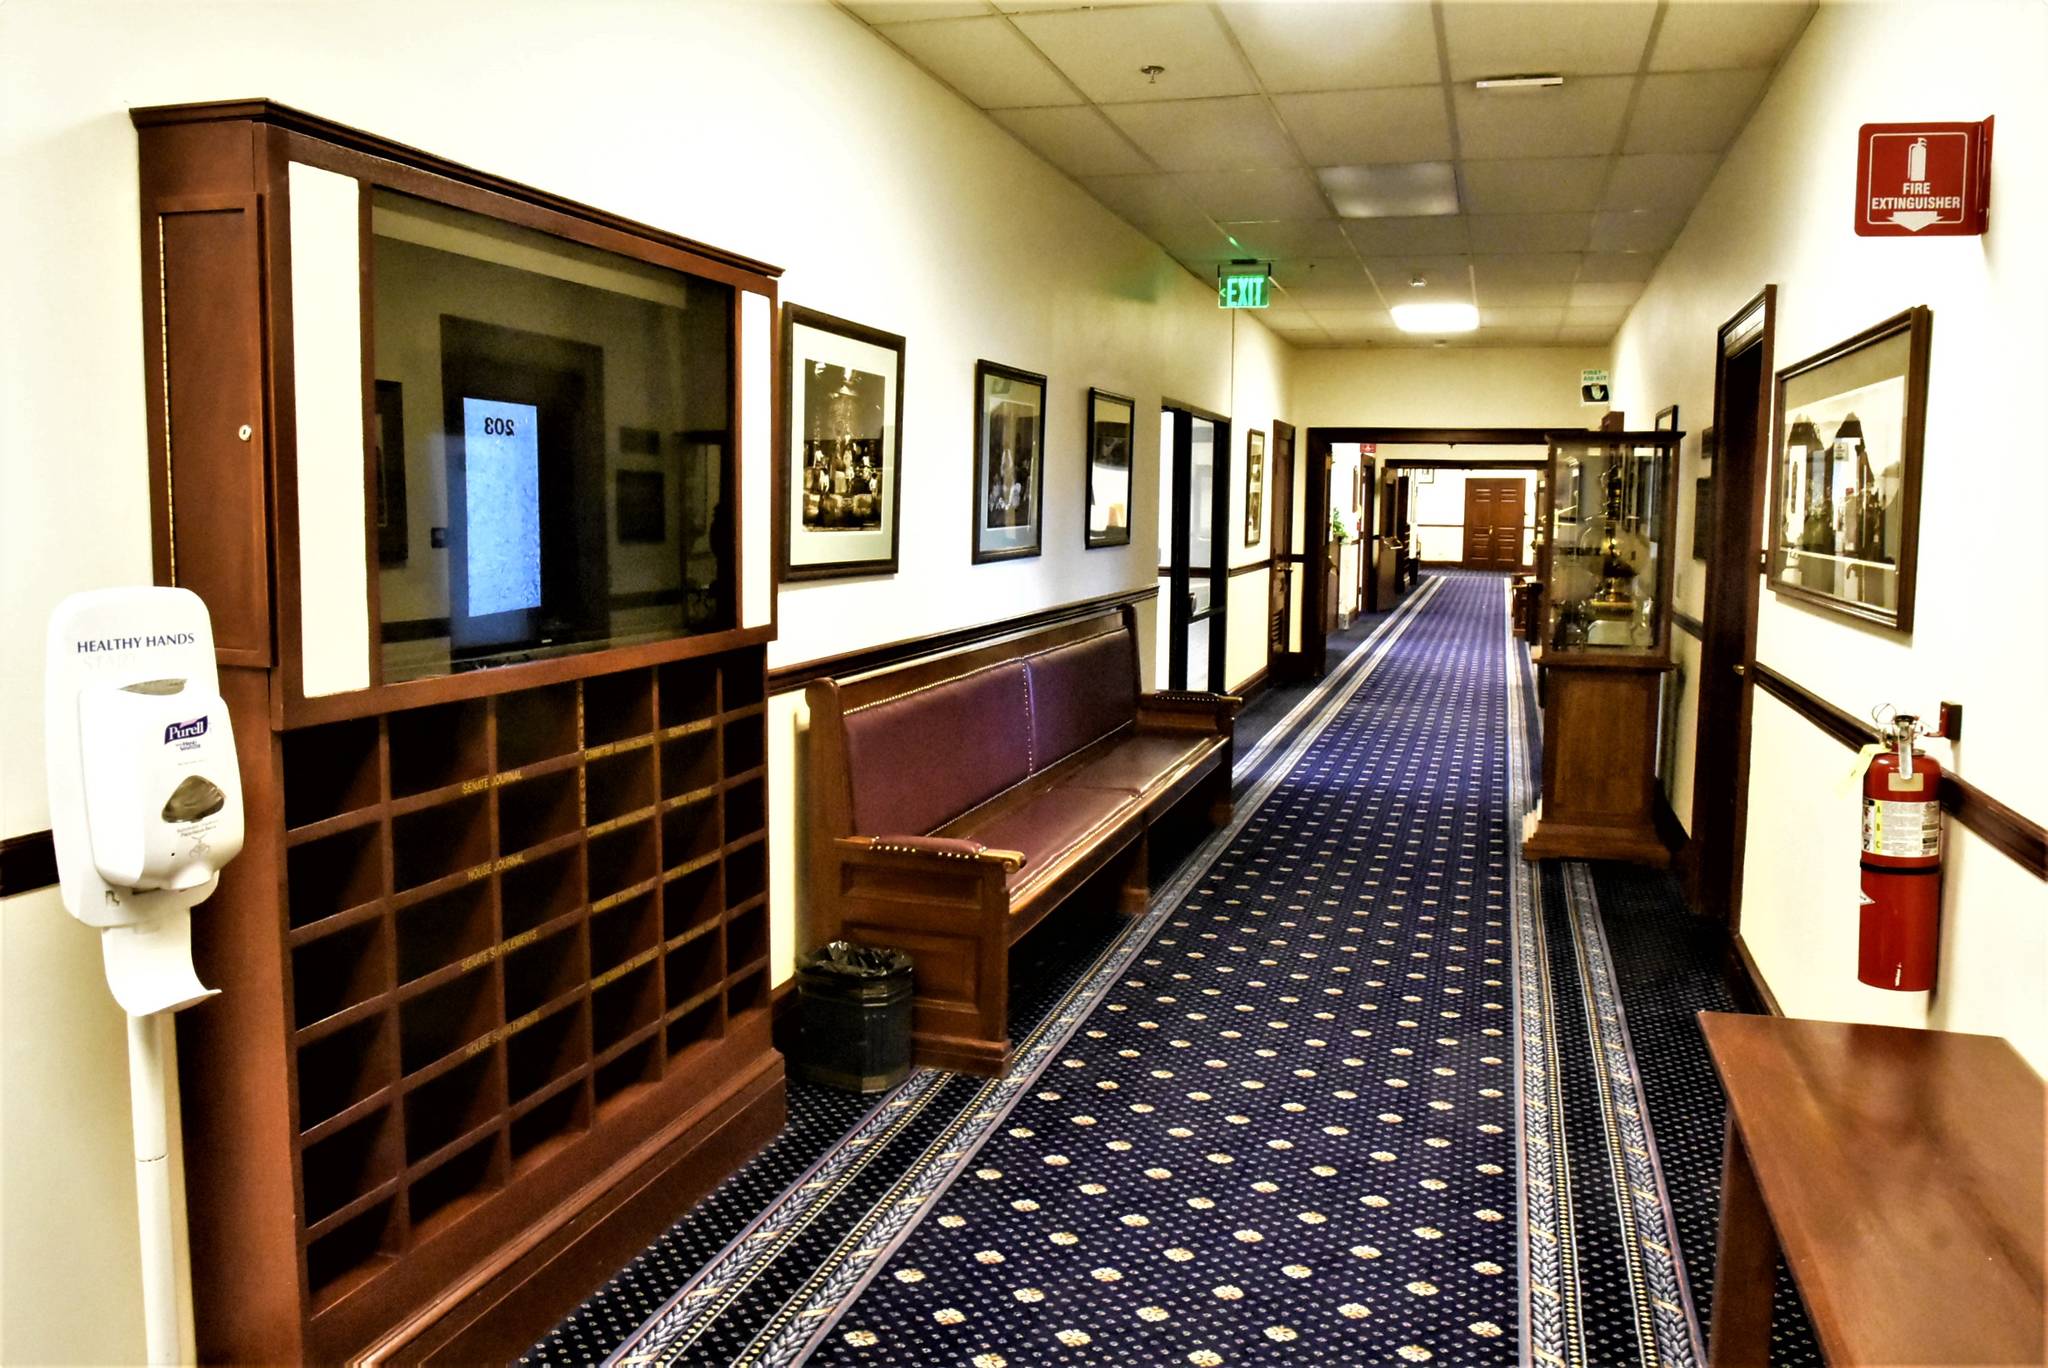 The halls of the State Capitol were empty Monday, March 30, 2020, as most lawmakers and their staff have returned to their home districts. The Legislature is recessed rather than adjourned, which means they can be called back to take action is necessary. (Peter Segall | Juneau Empire)